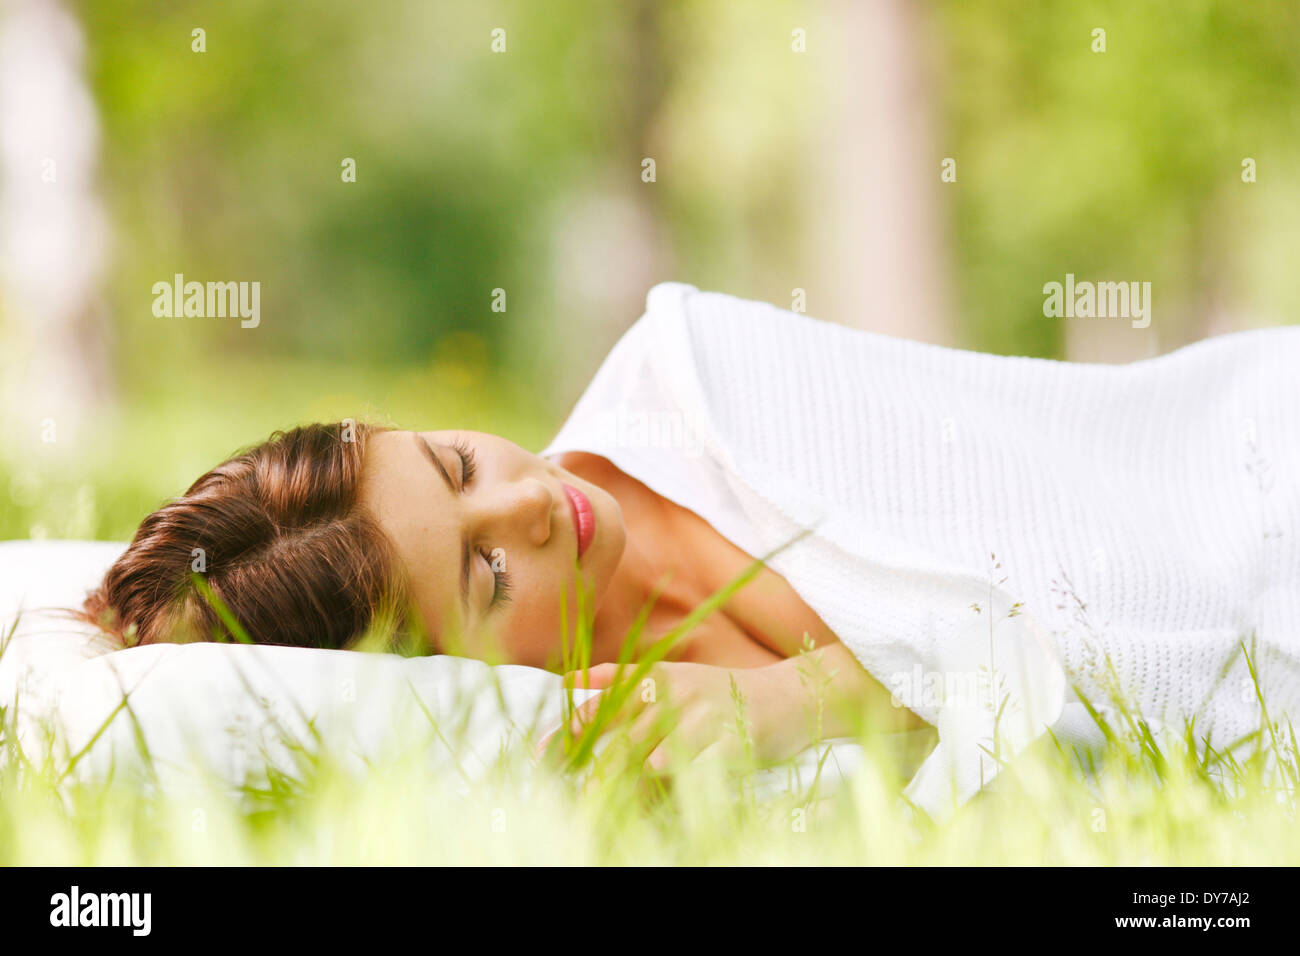 Young woman sleeping on soft pillow in fresh spring grass Stock Photo